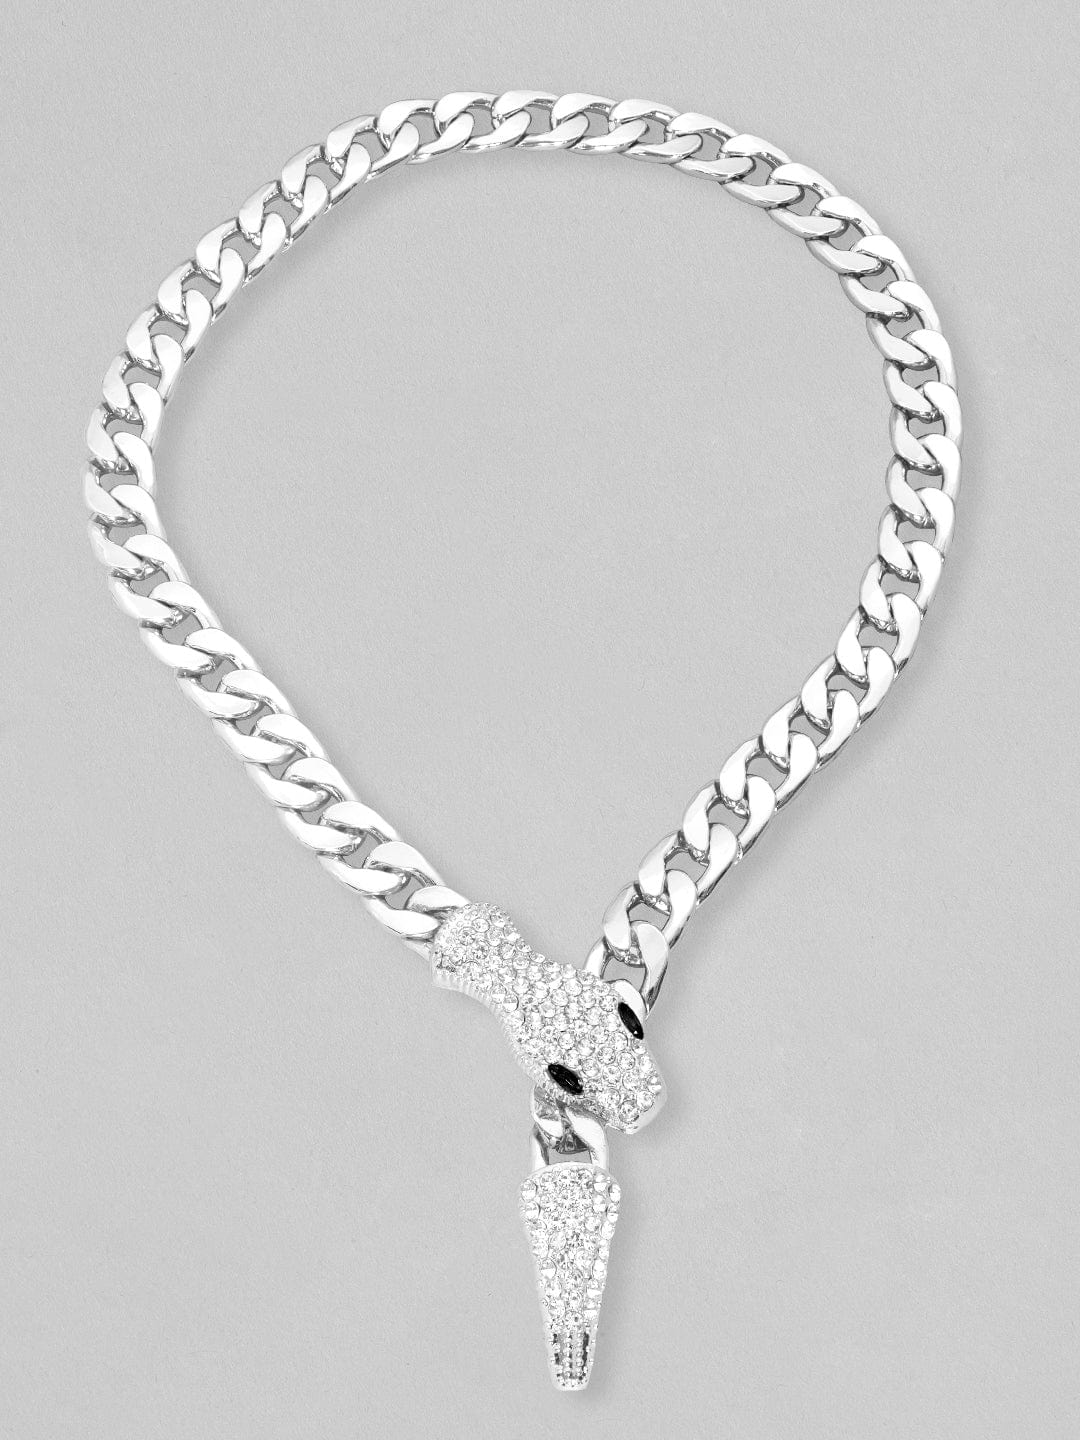 Rubans Voguish Silver Toned Link Style Serpent Chain With Zircon Stones Studded. Chain &amp; Necklaces